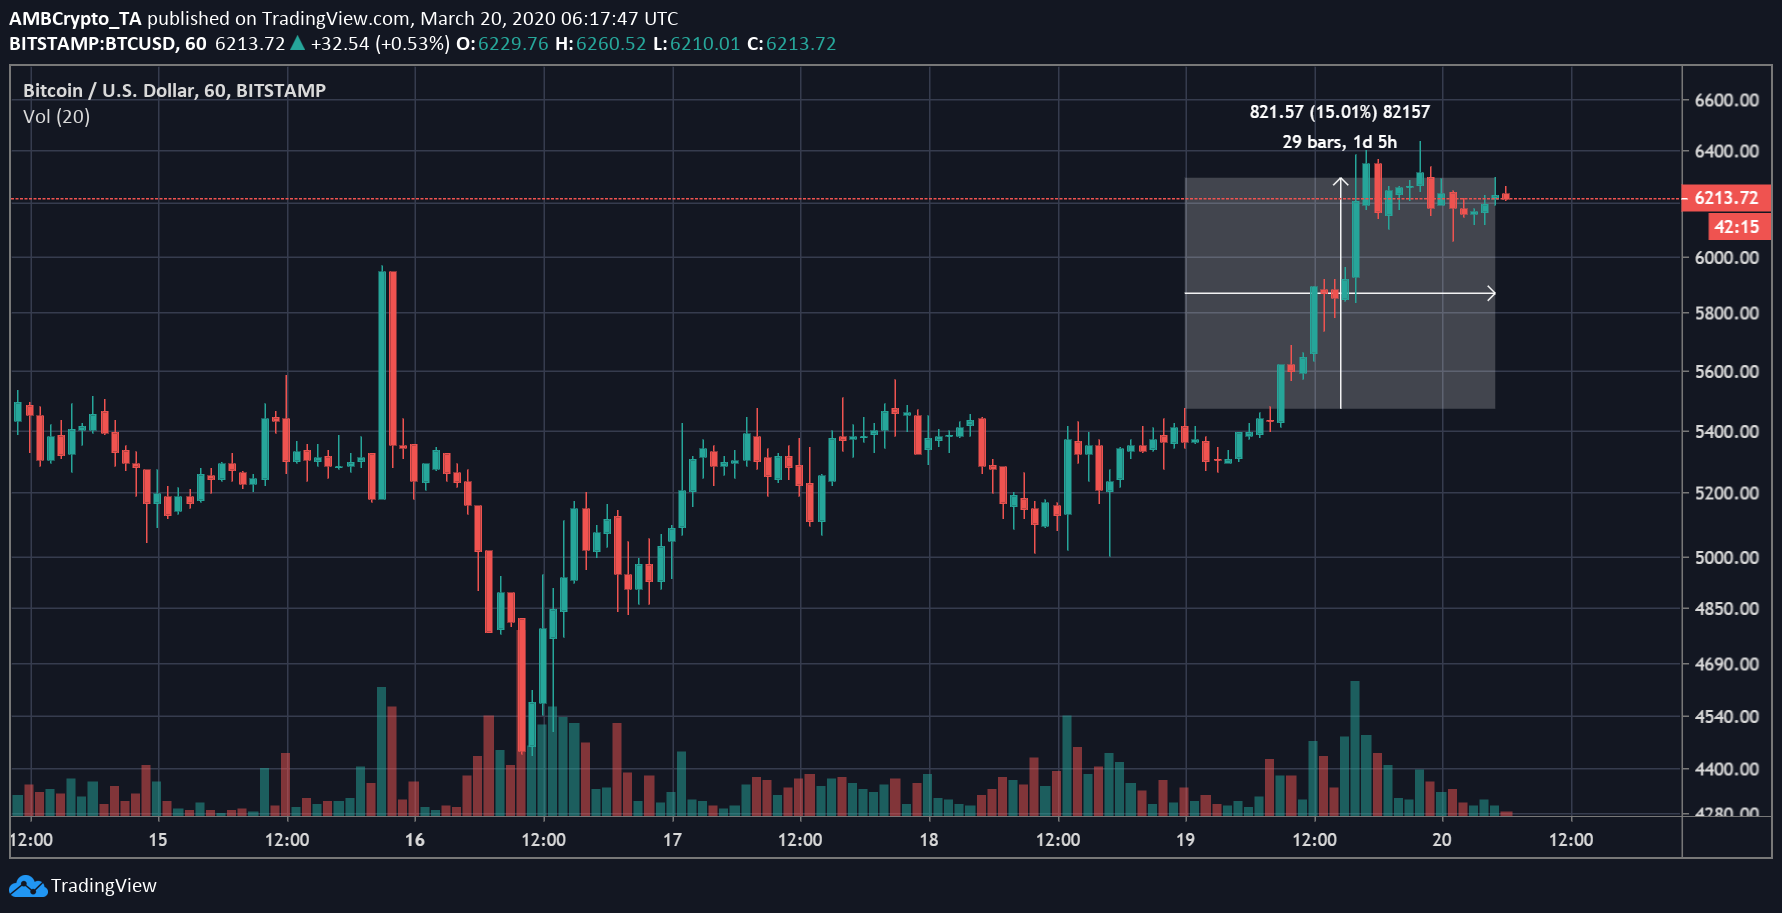 Source: BTC/USD on Trading View